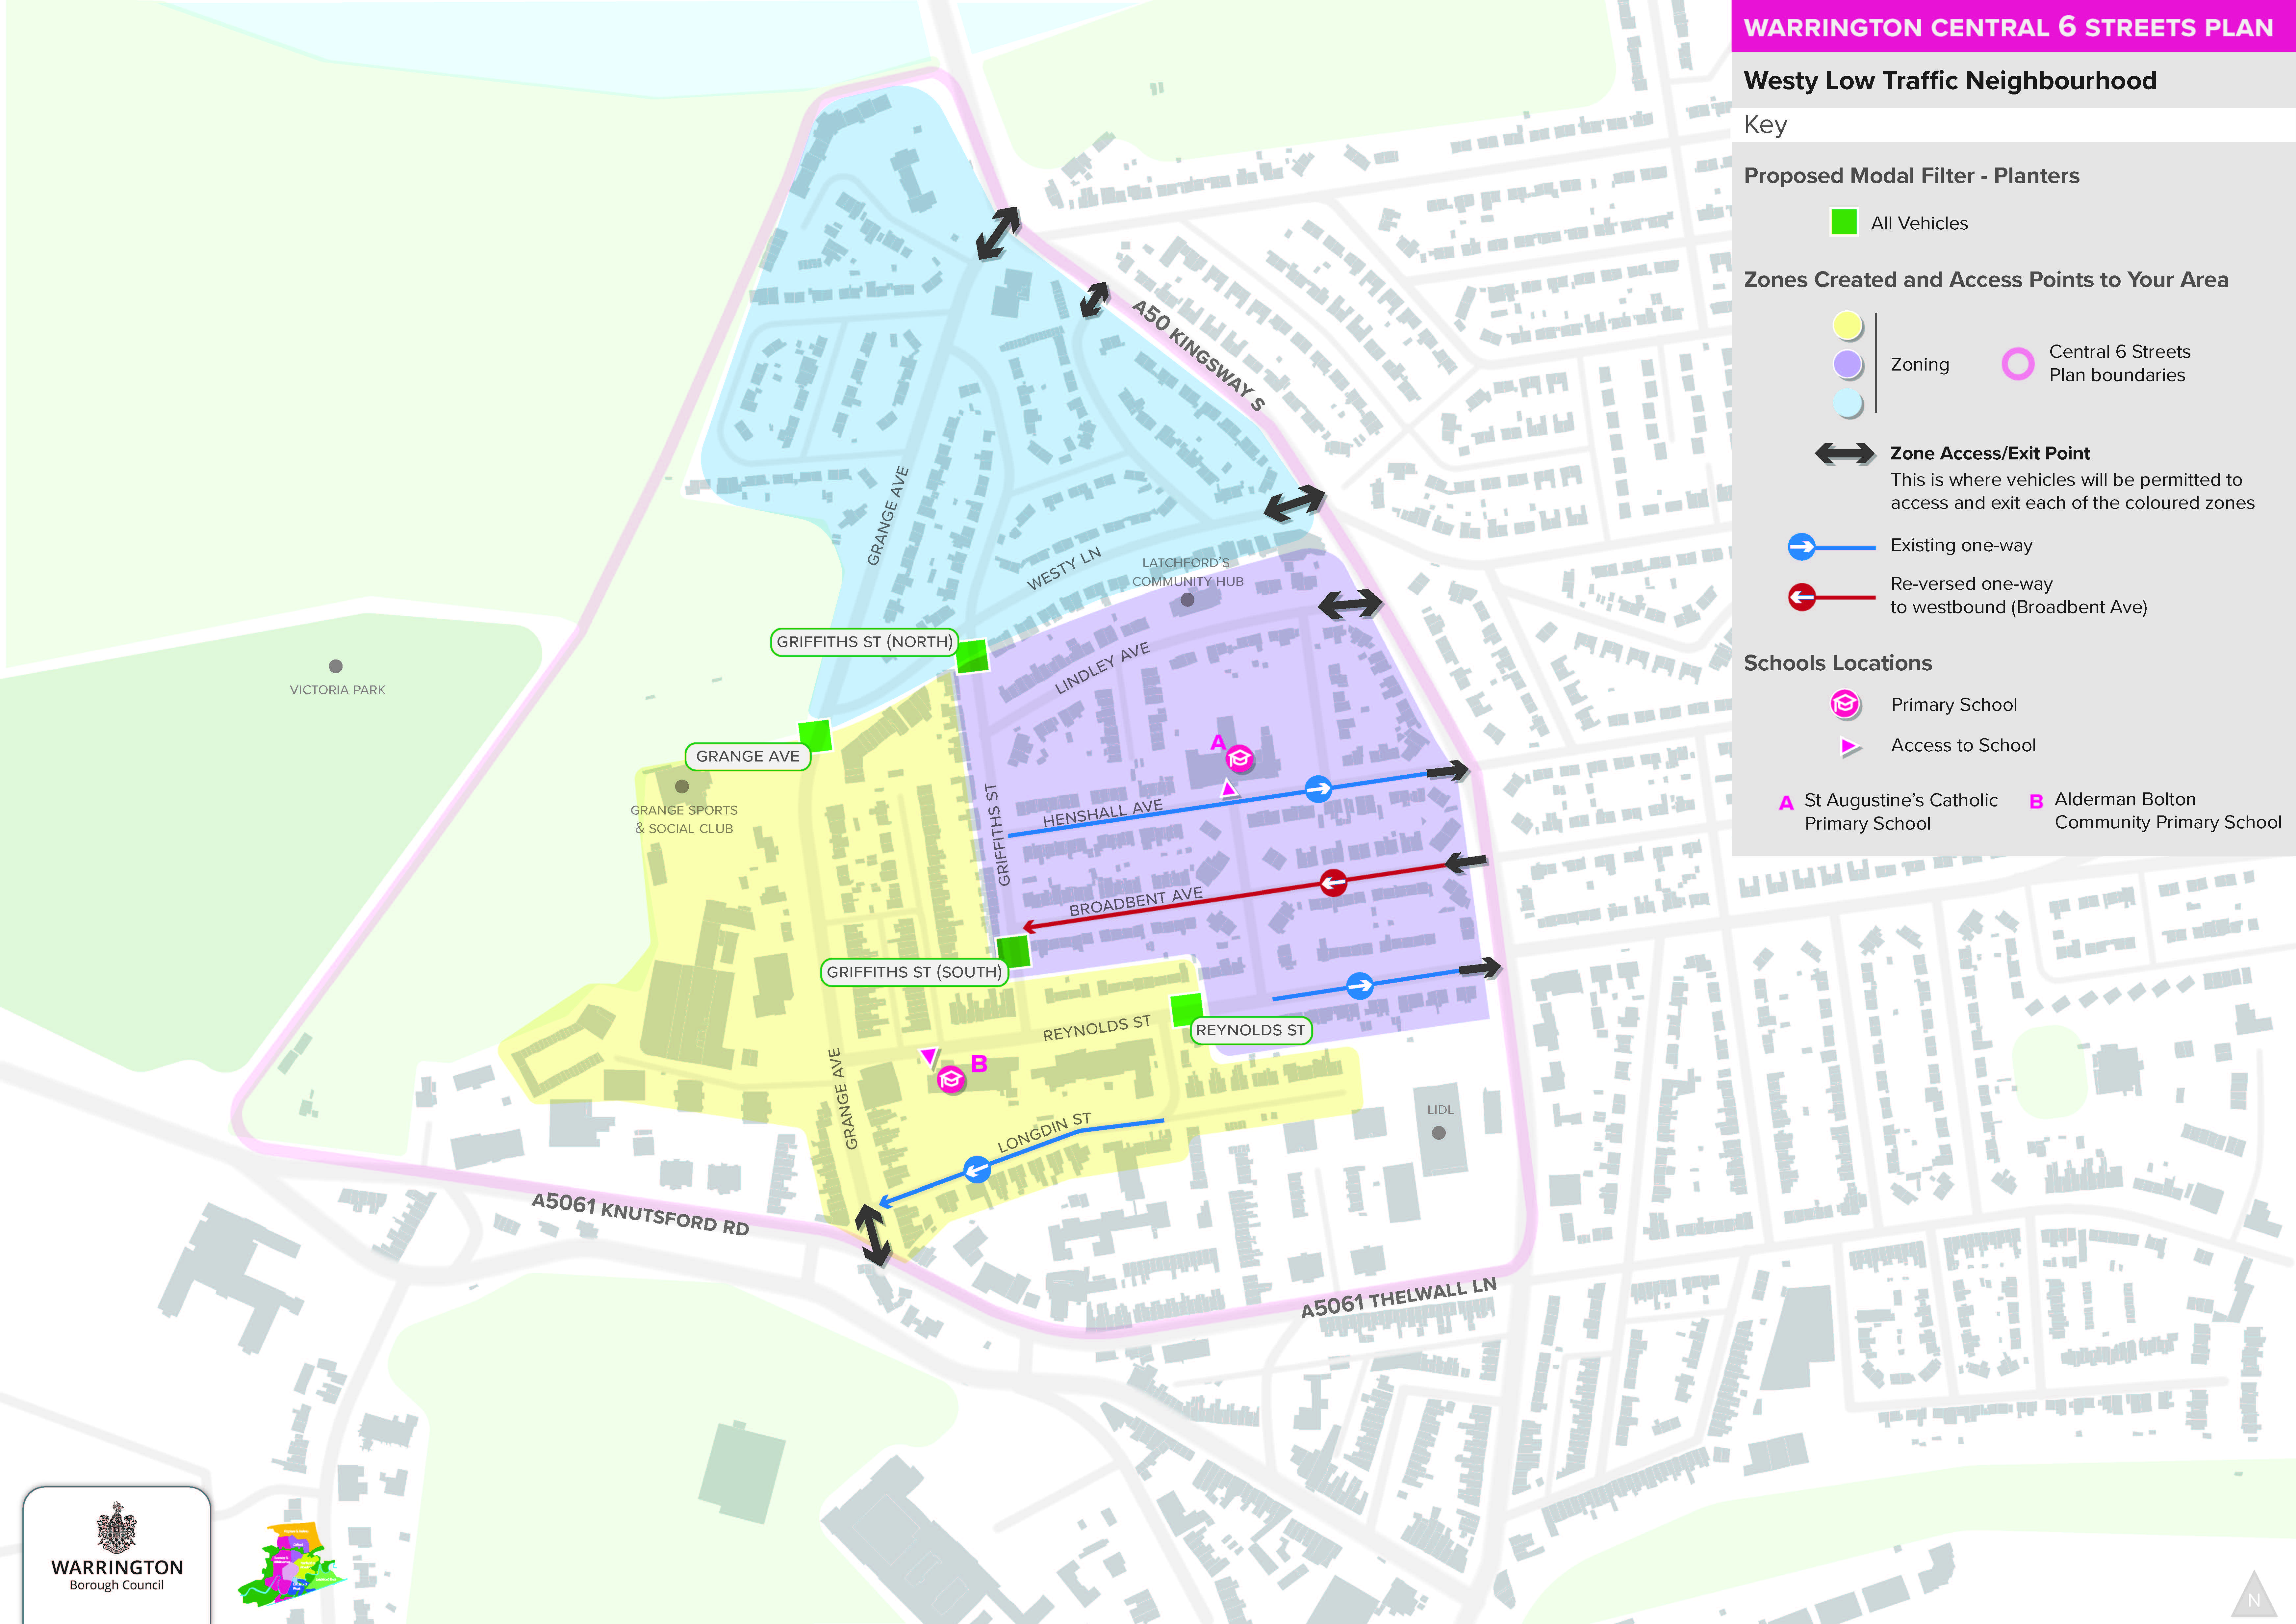 The plan shows several ‘modal filter’ locations across the Orford area. Modal filters are effectively point-closures that restrict vehicular traffic from accessing a particular street. They are proposed to be located at:  Grange Ave, south of the junction with Westy Lane Griffiths Street, south of the junction with Westy Lane Griffiths Street, south of the junction with Broadbent Avenue Reynolds Street, east of the junction with Tinsley Street Access to the area around St Augustine’s Primary School will be 